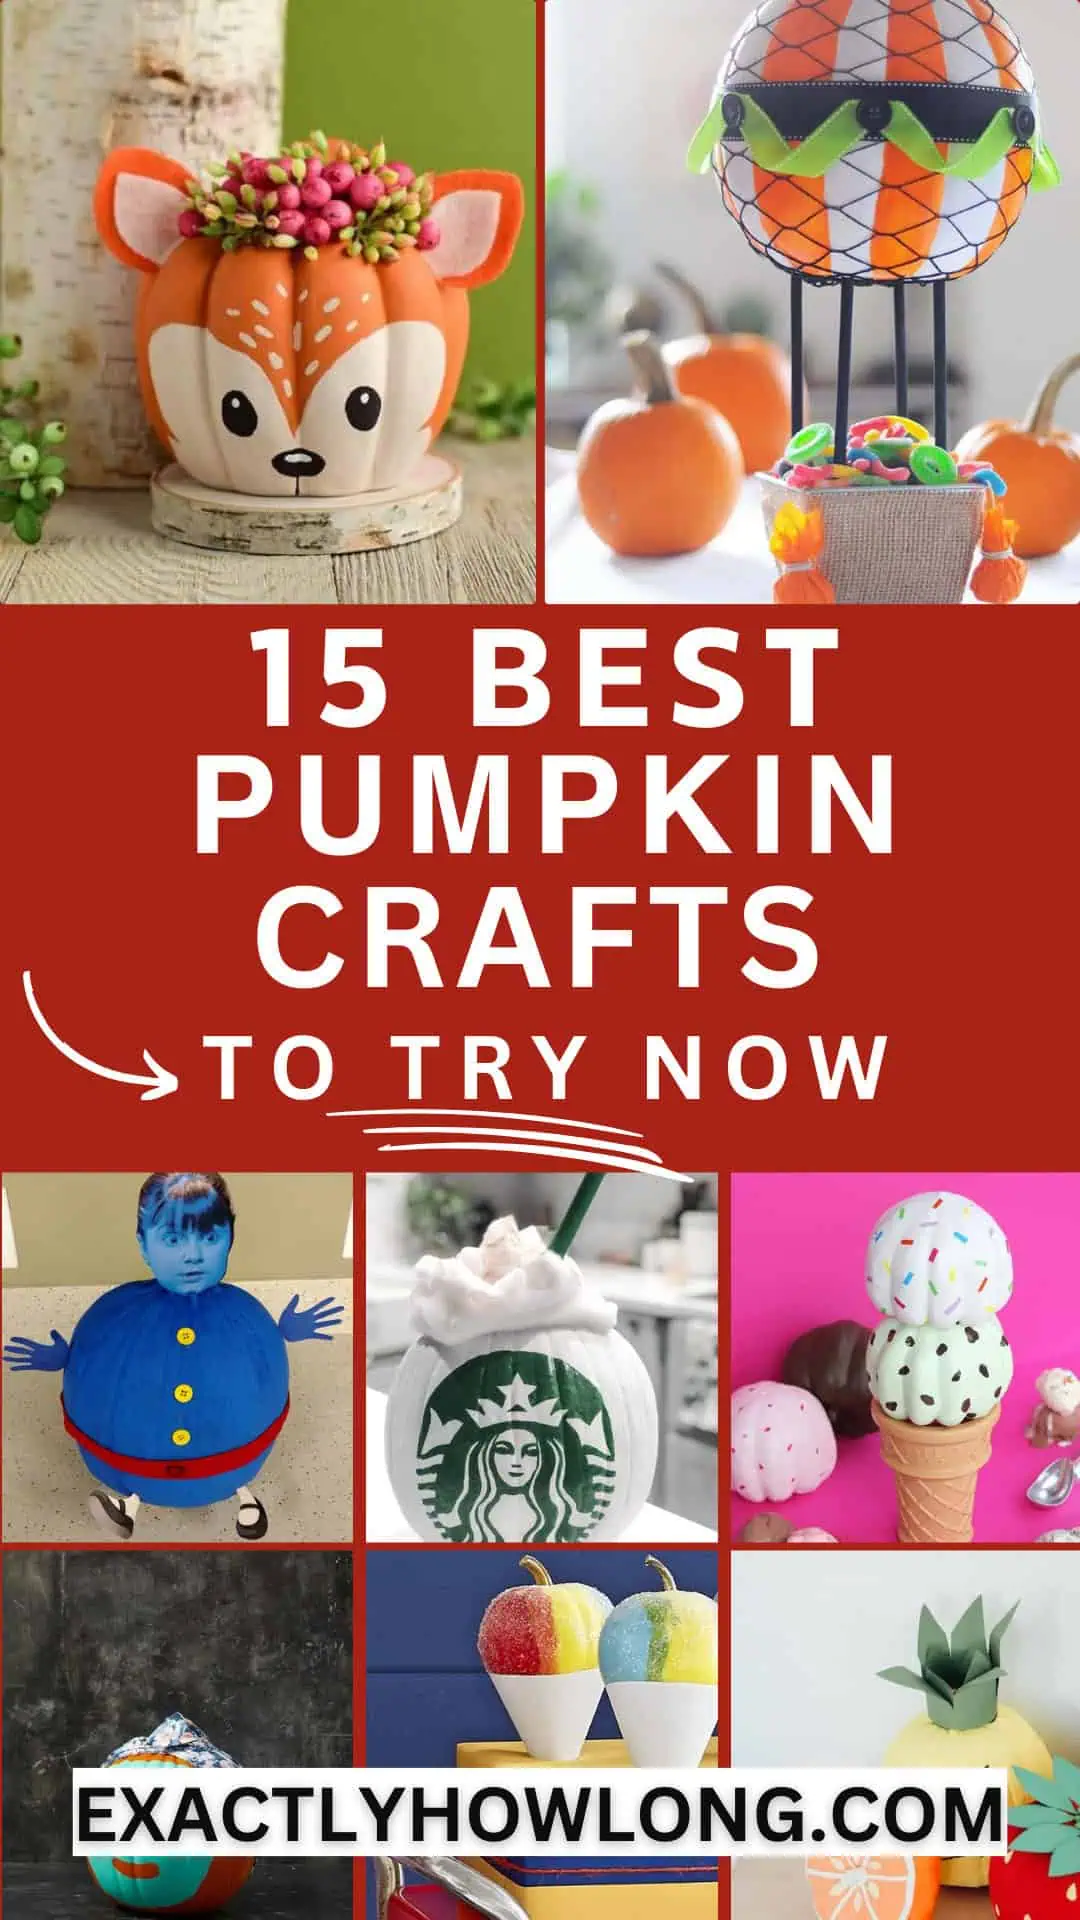 Simple dollar store DIY pumpkin crafts for both kids and adults - autumn crafts suitable for both children and adults.